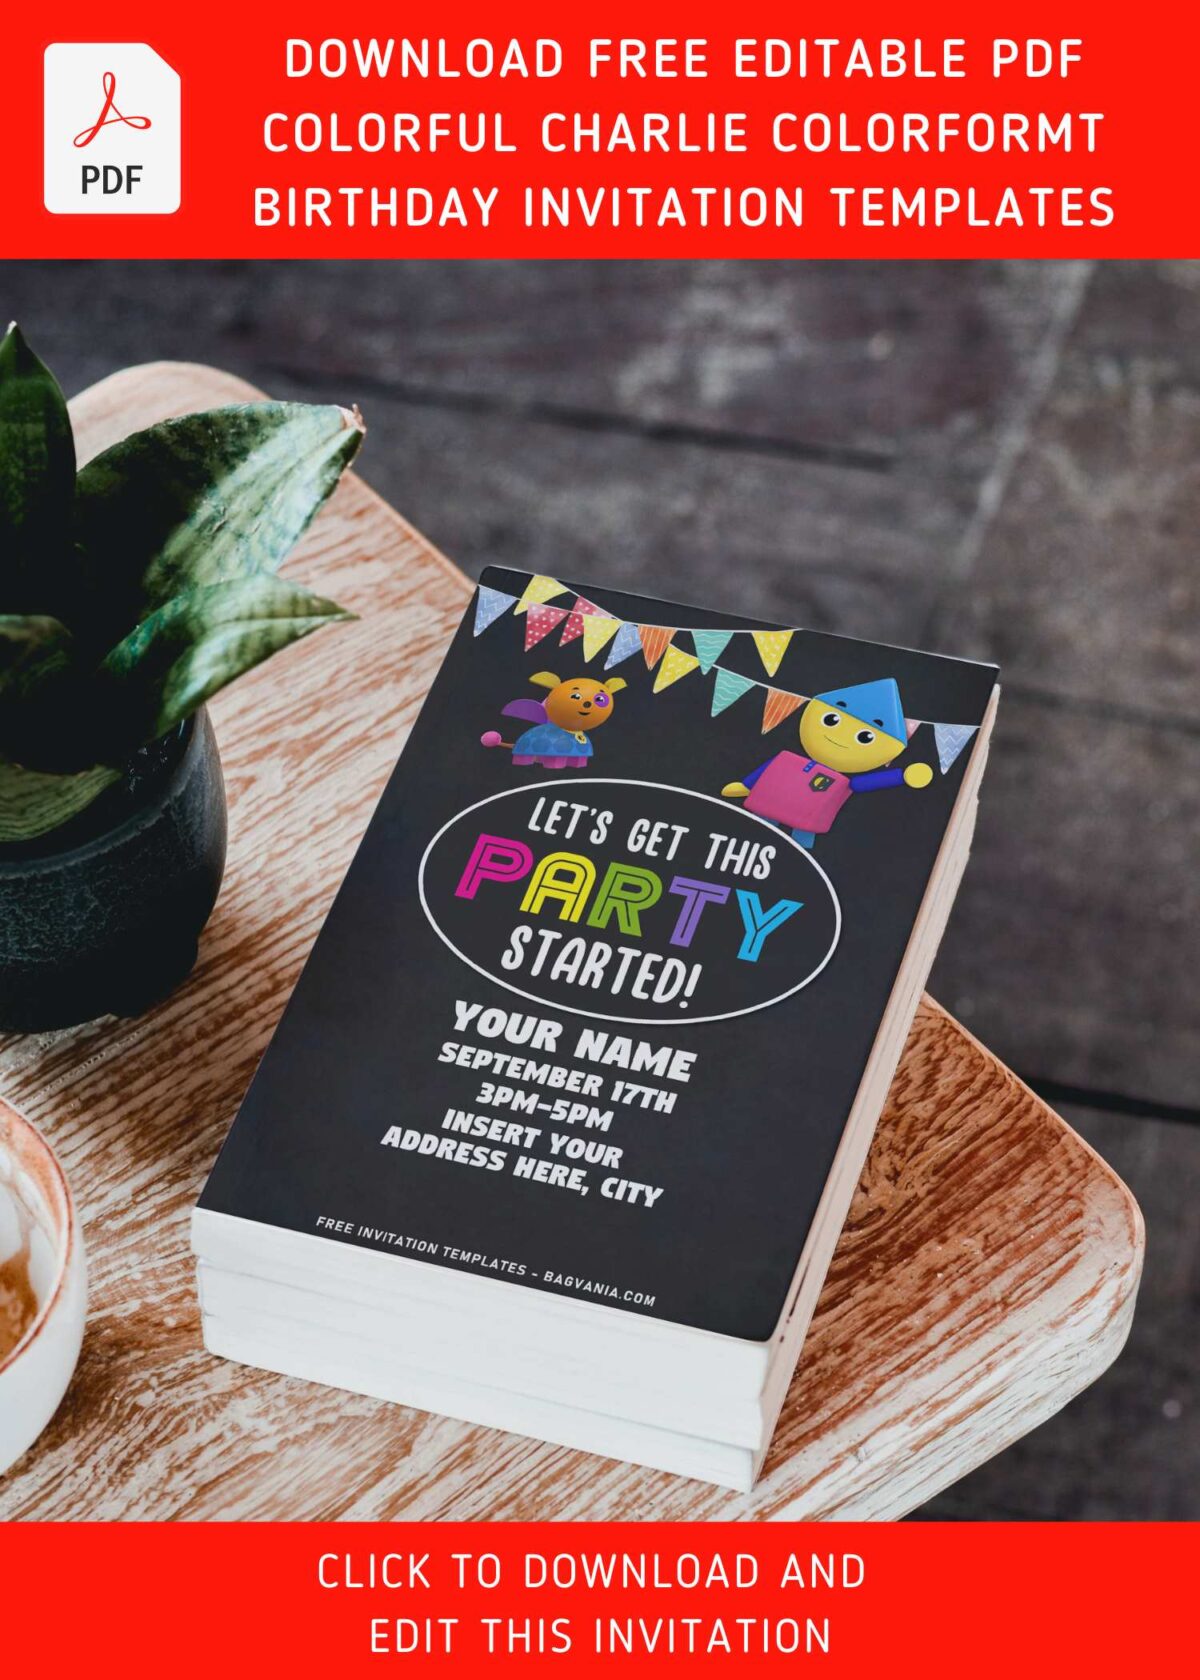 (Free Editable PDF) Chalkboard Charlie's Colorform City Birthday Invitation Templates with colorful bunting flags